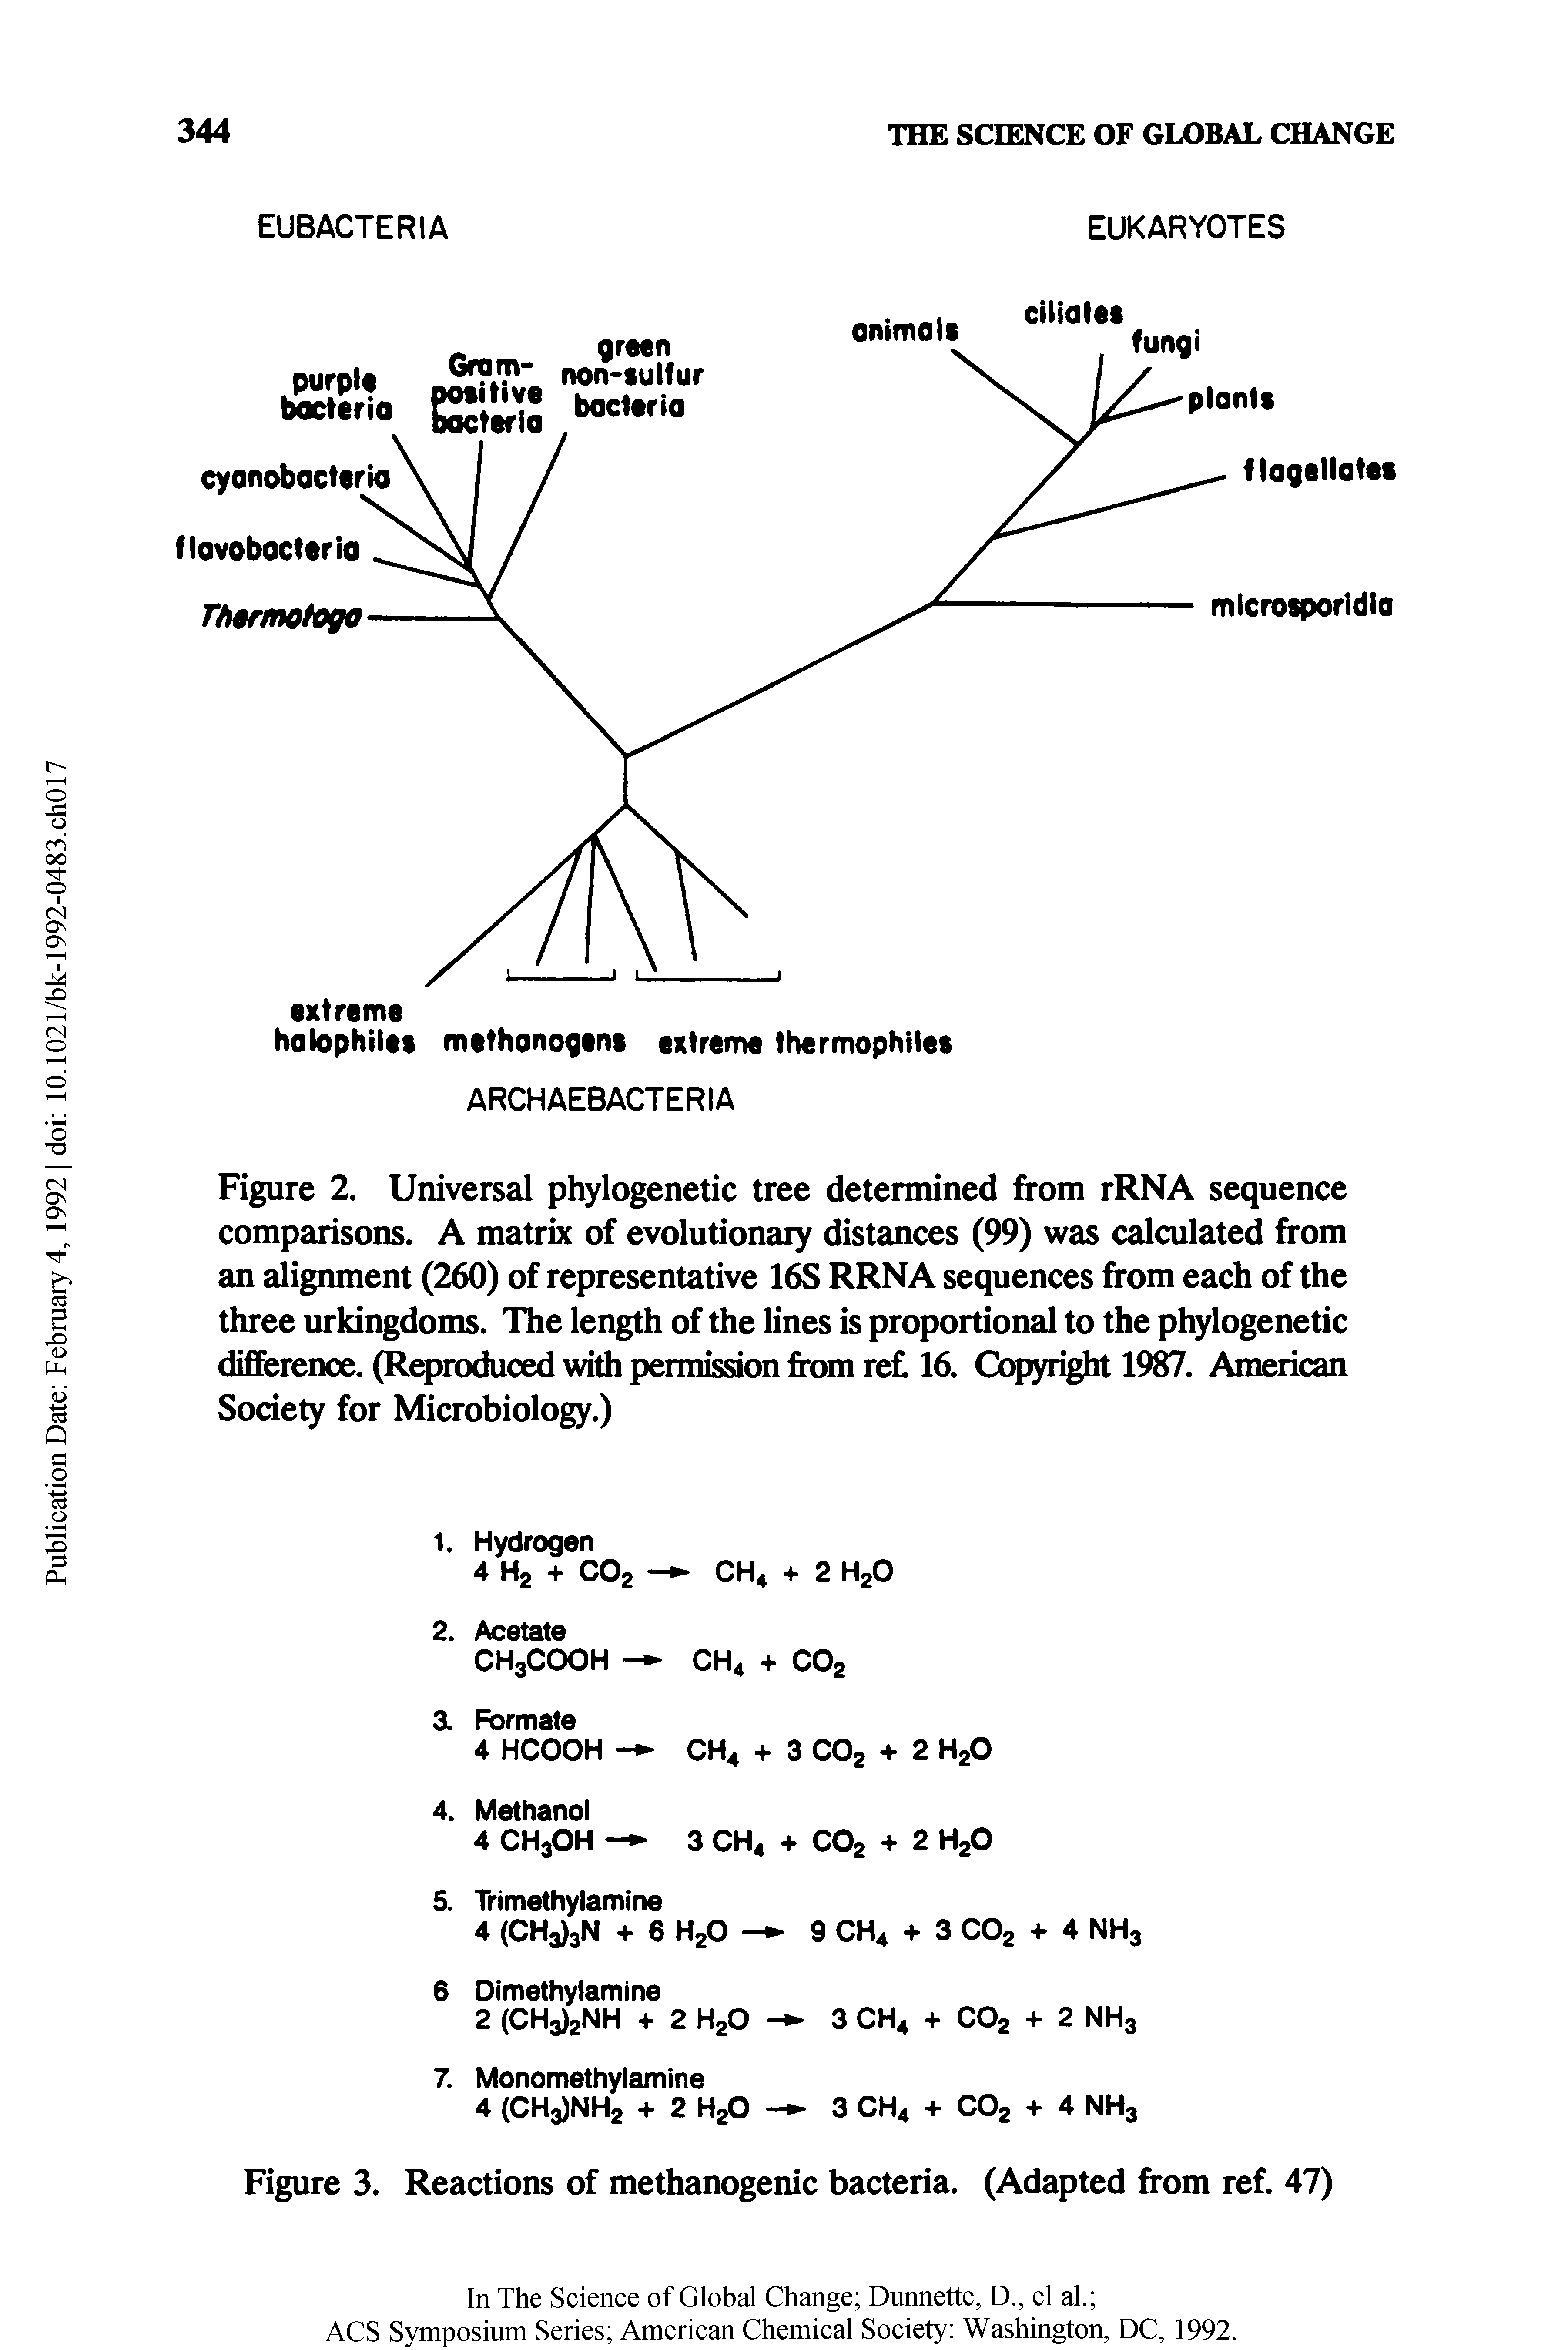 Figure 2. Universal phylogenetic tree determined from rRNA sequence comparisons. A matrix of evolutionary distances (99) was calculated from an alignment (260) of representative 16S RRNA sequences from each of the three urkingdoms. The length of the lines is proportional to the phylogenetic difference. (Reproduced with permission from ret 16. Copyright 19. American Society for Microbiology.)...